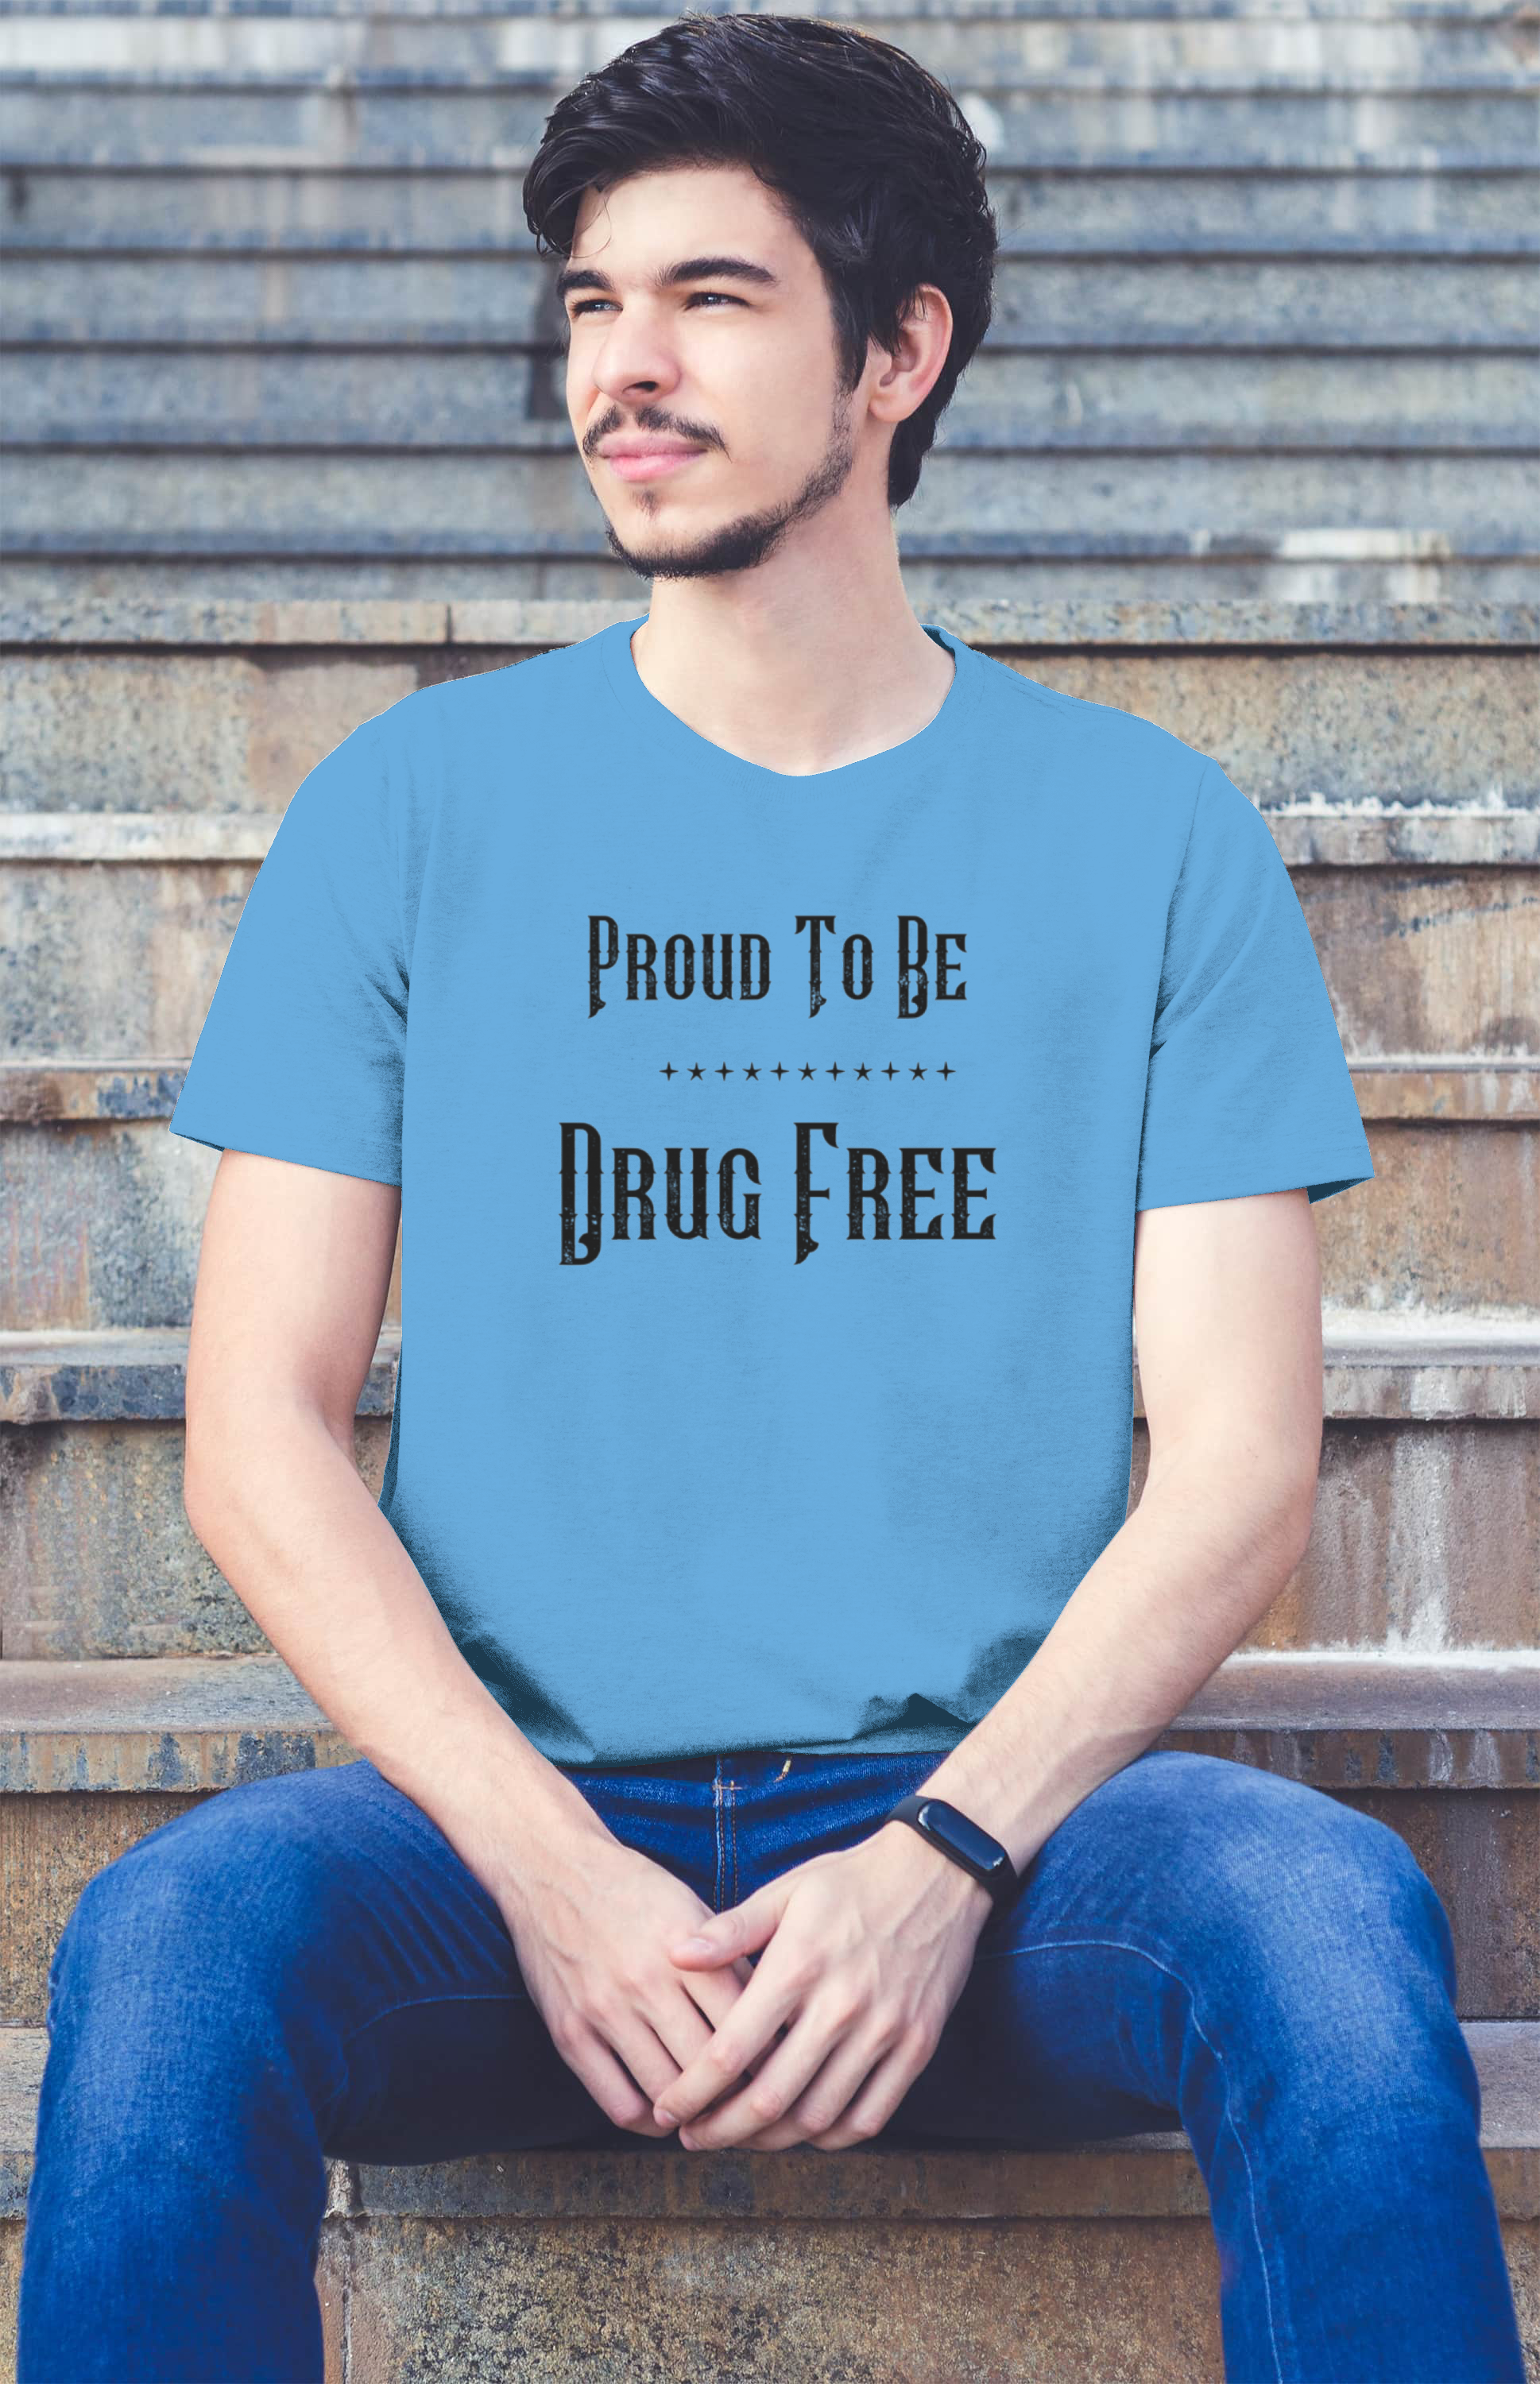 "Proud To Be Drug Free" T-Shirt - Weave Got Gifts - Unique Gifts You Won’t Find Anywhere Else!